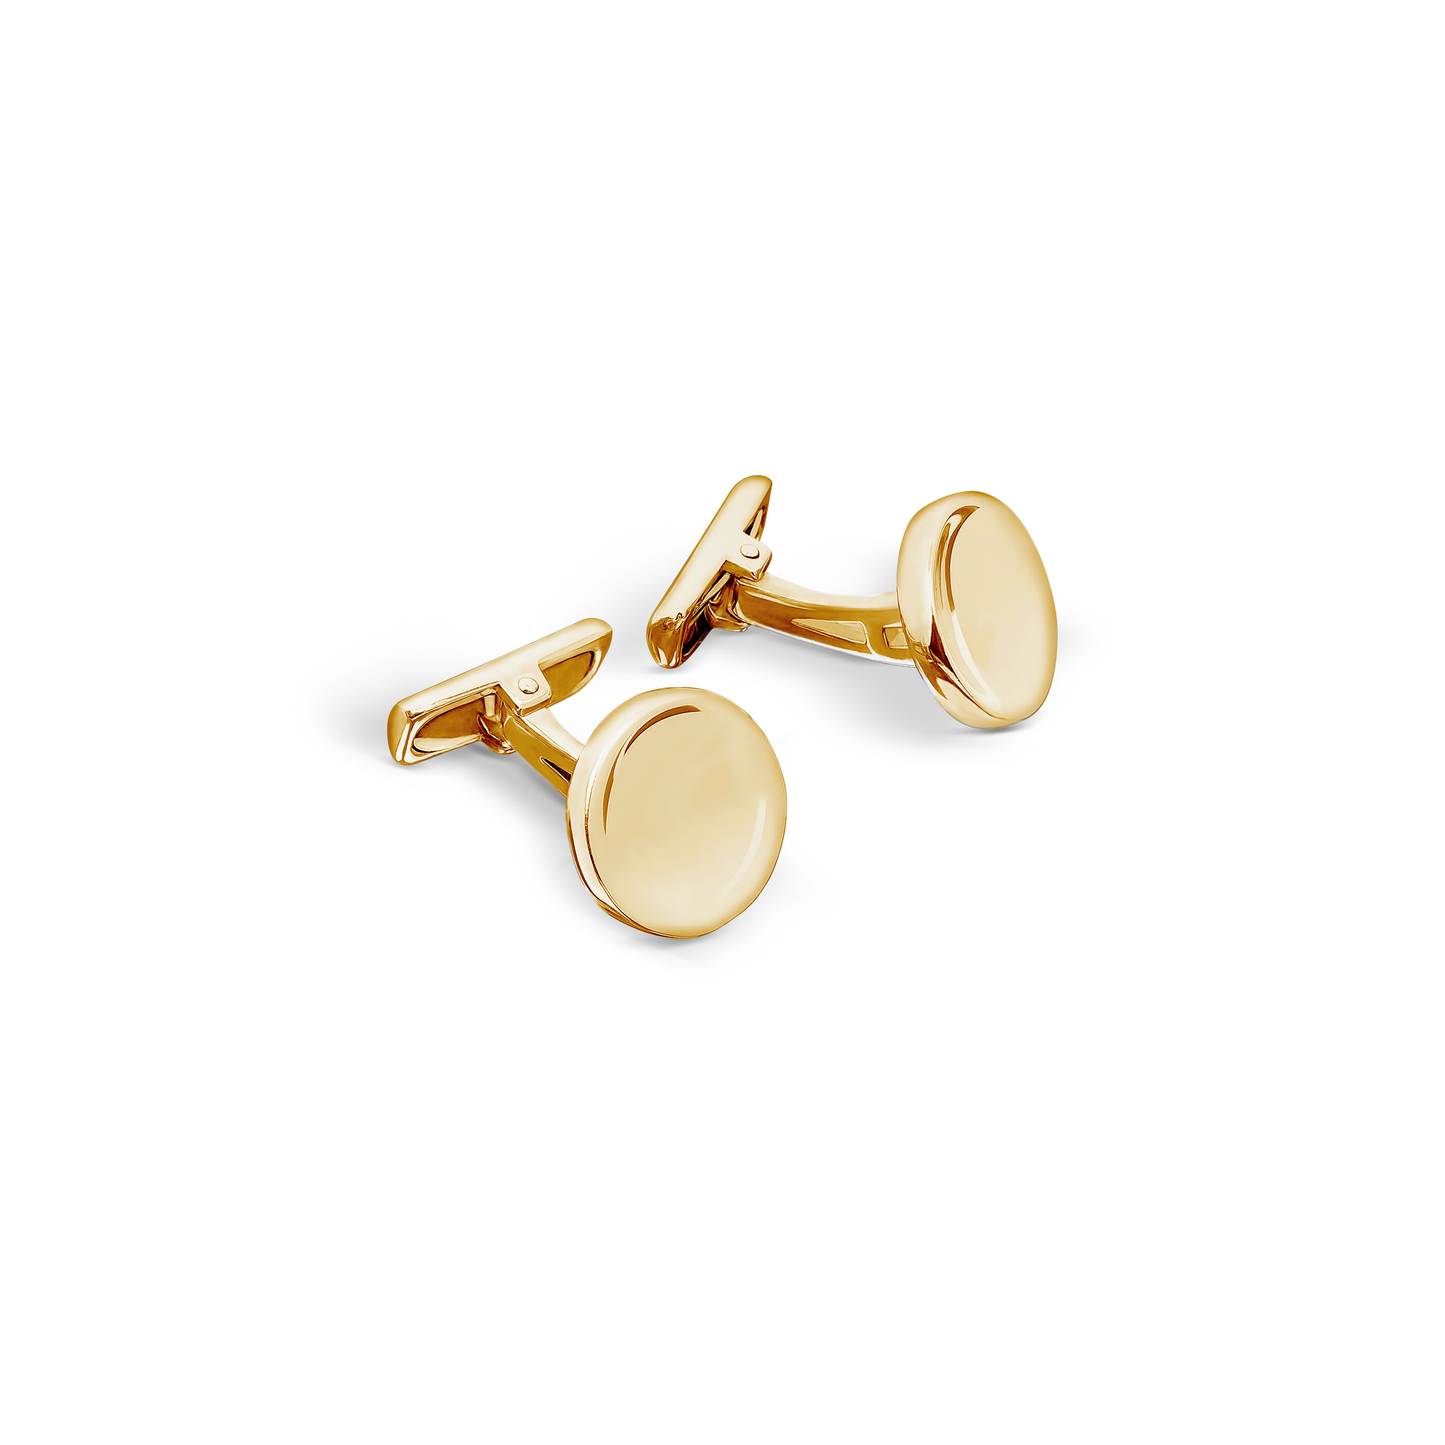 Round Concave Cufflinks in 18ct Yellow Gold